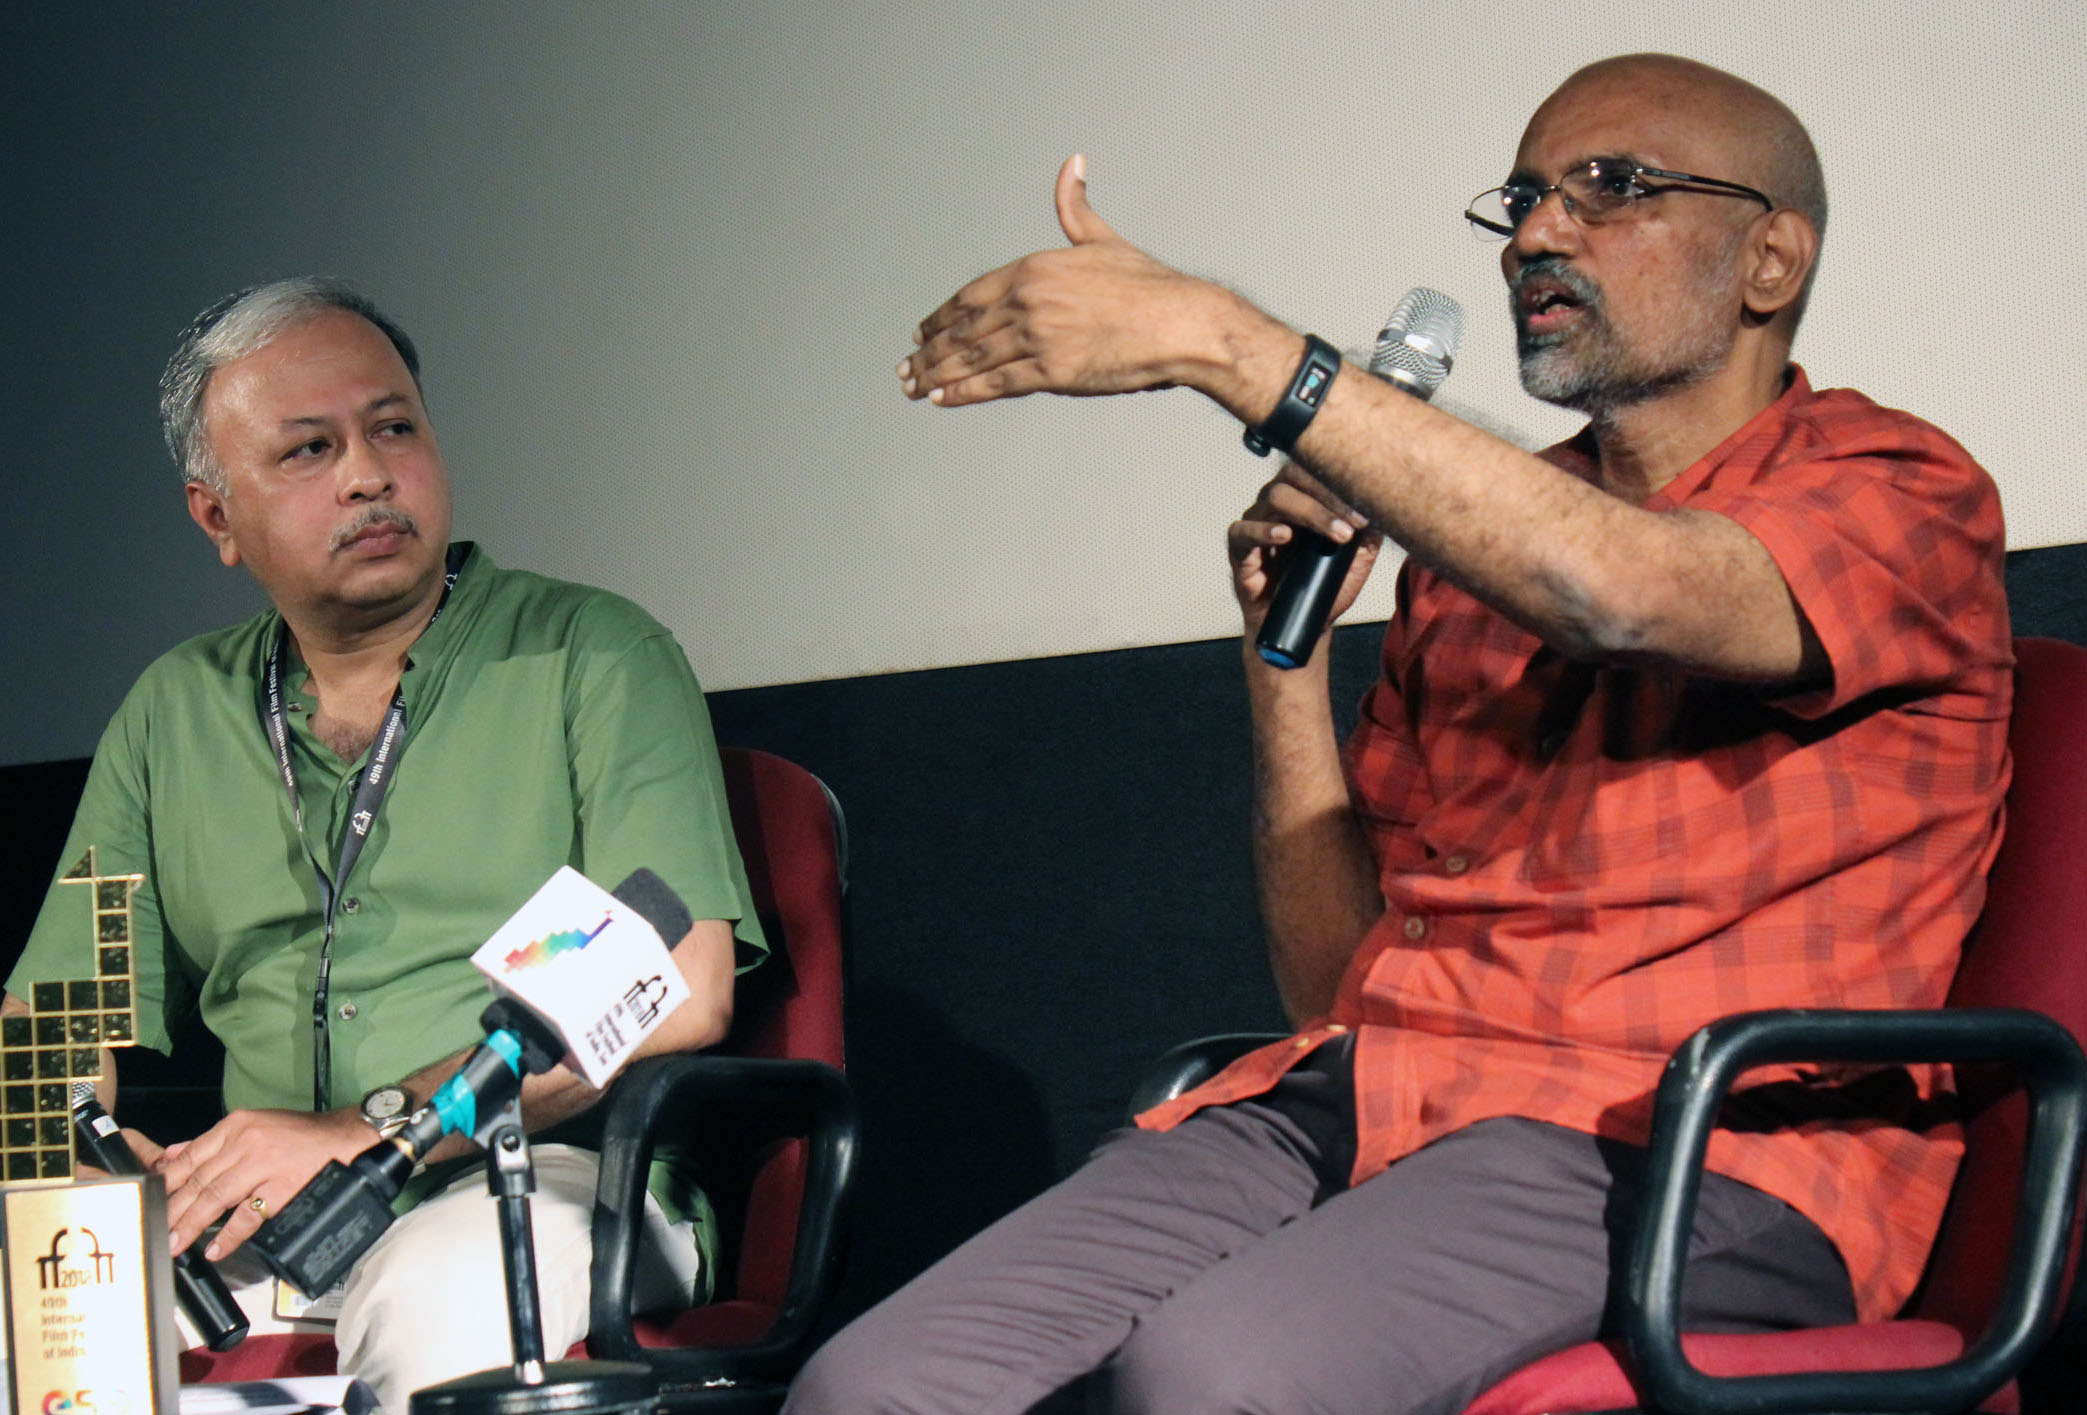 Sh. Sreekar Prasad delivering his views on Film Editing during his master class session.